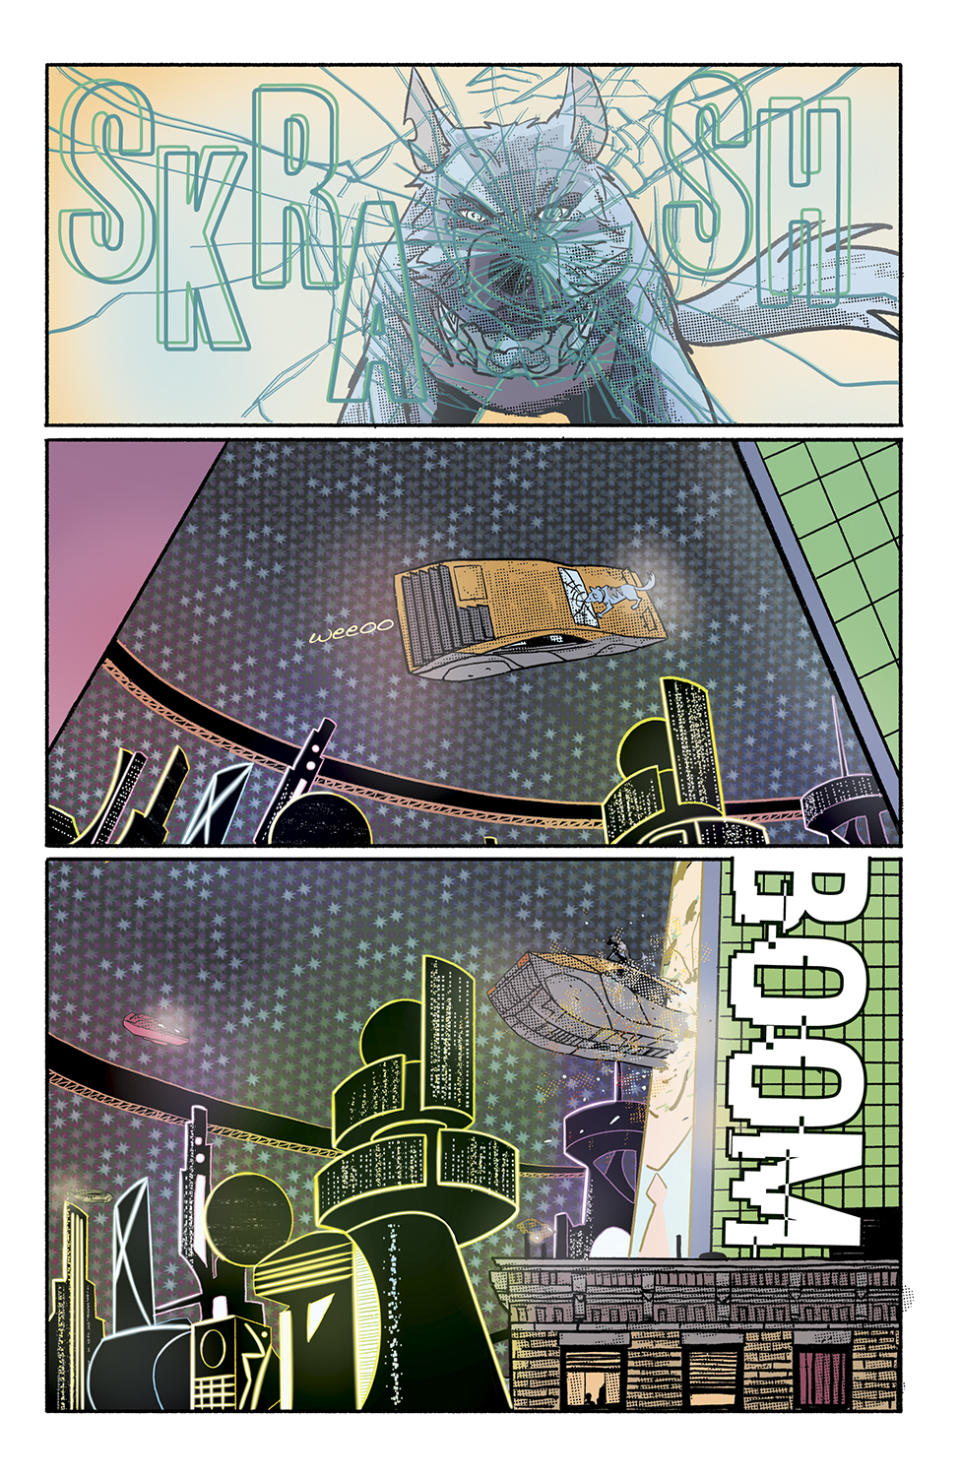 Scrapper interior pages: the dog smashes the glass on the flying car.